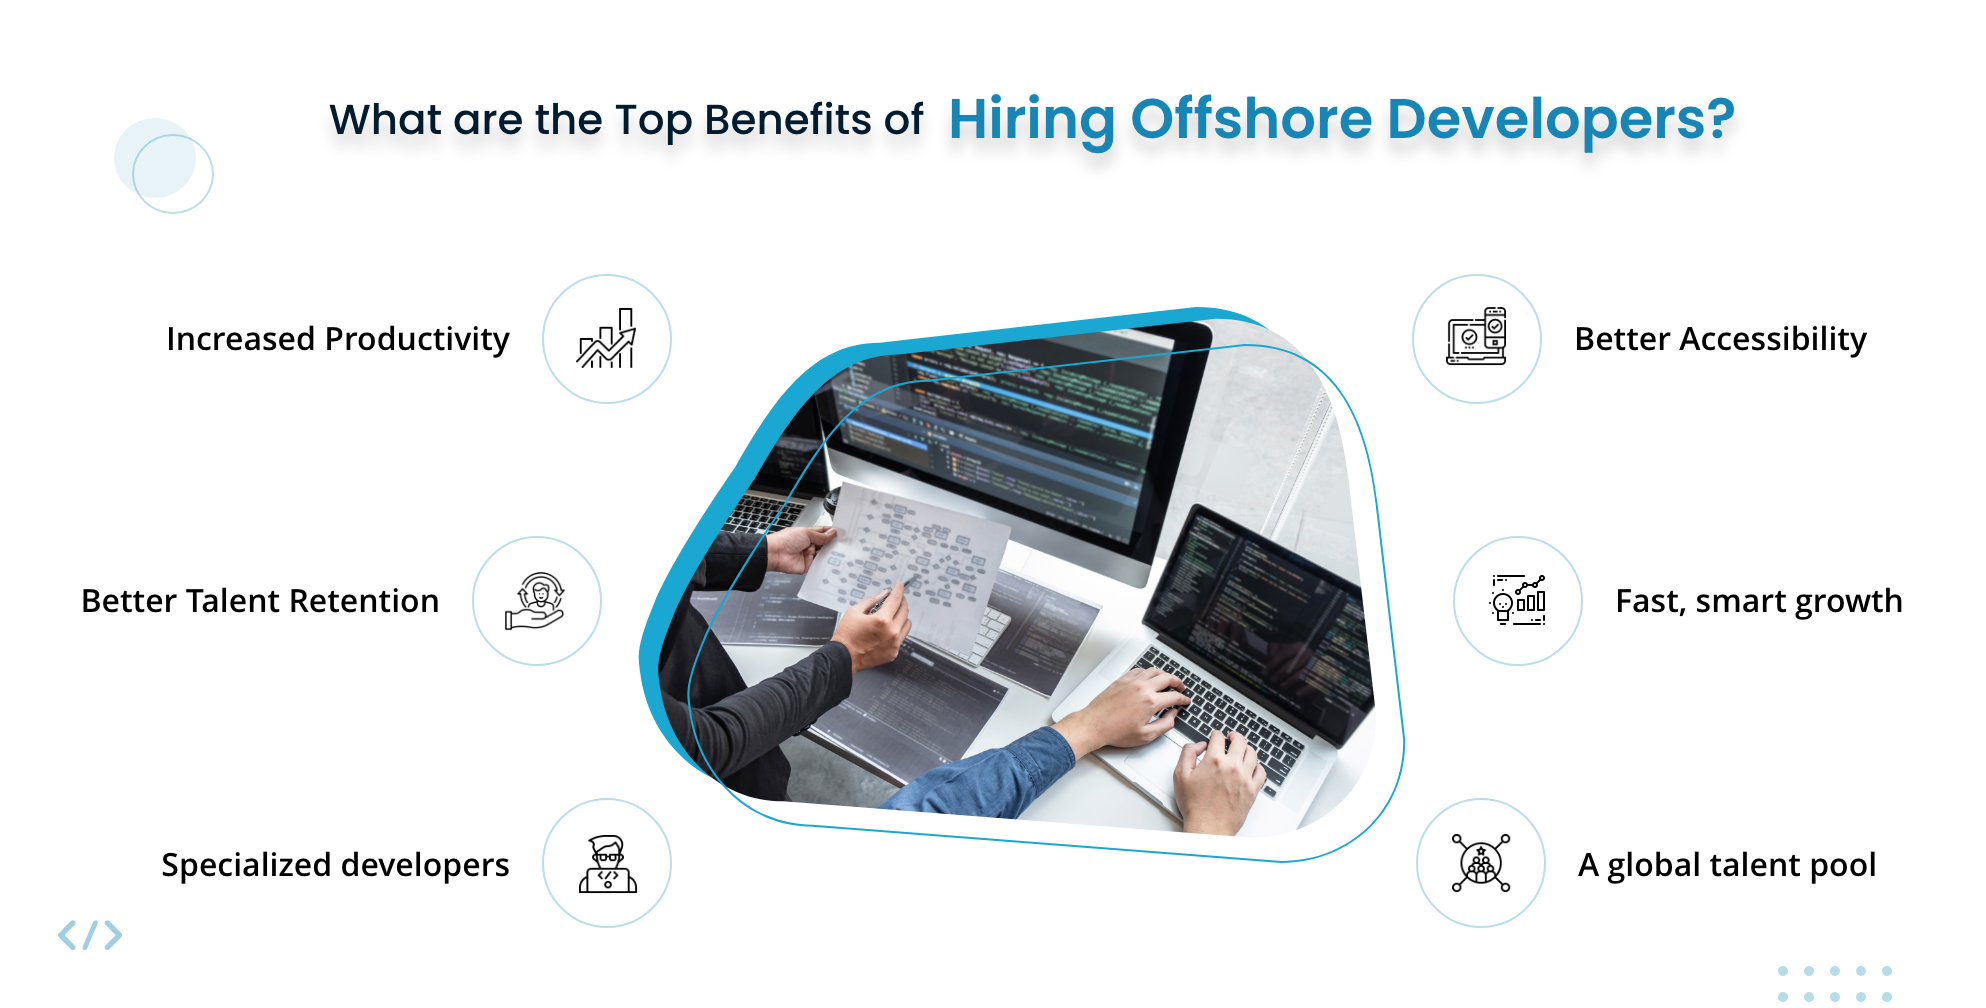 What are the Top Benefits of Hiring Offshore Developers